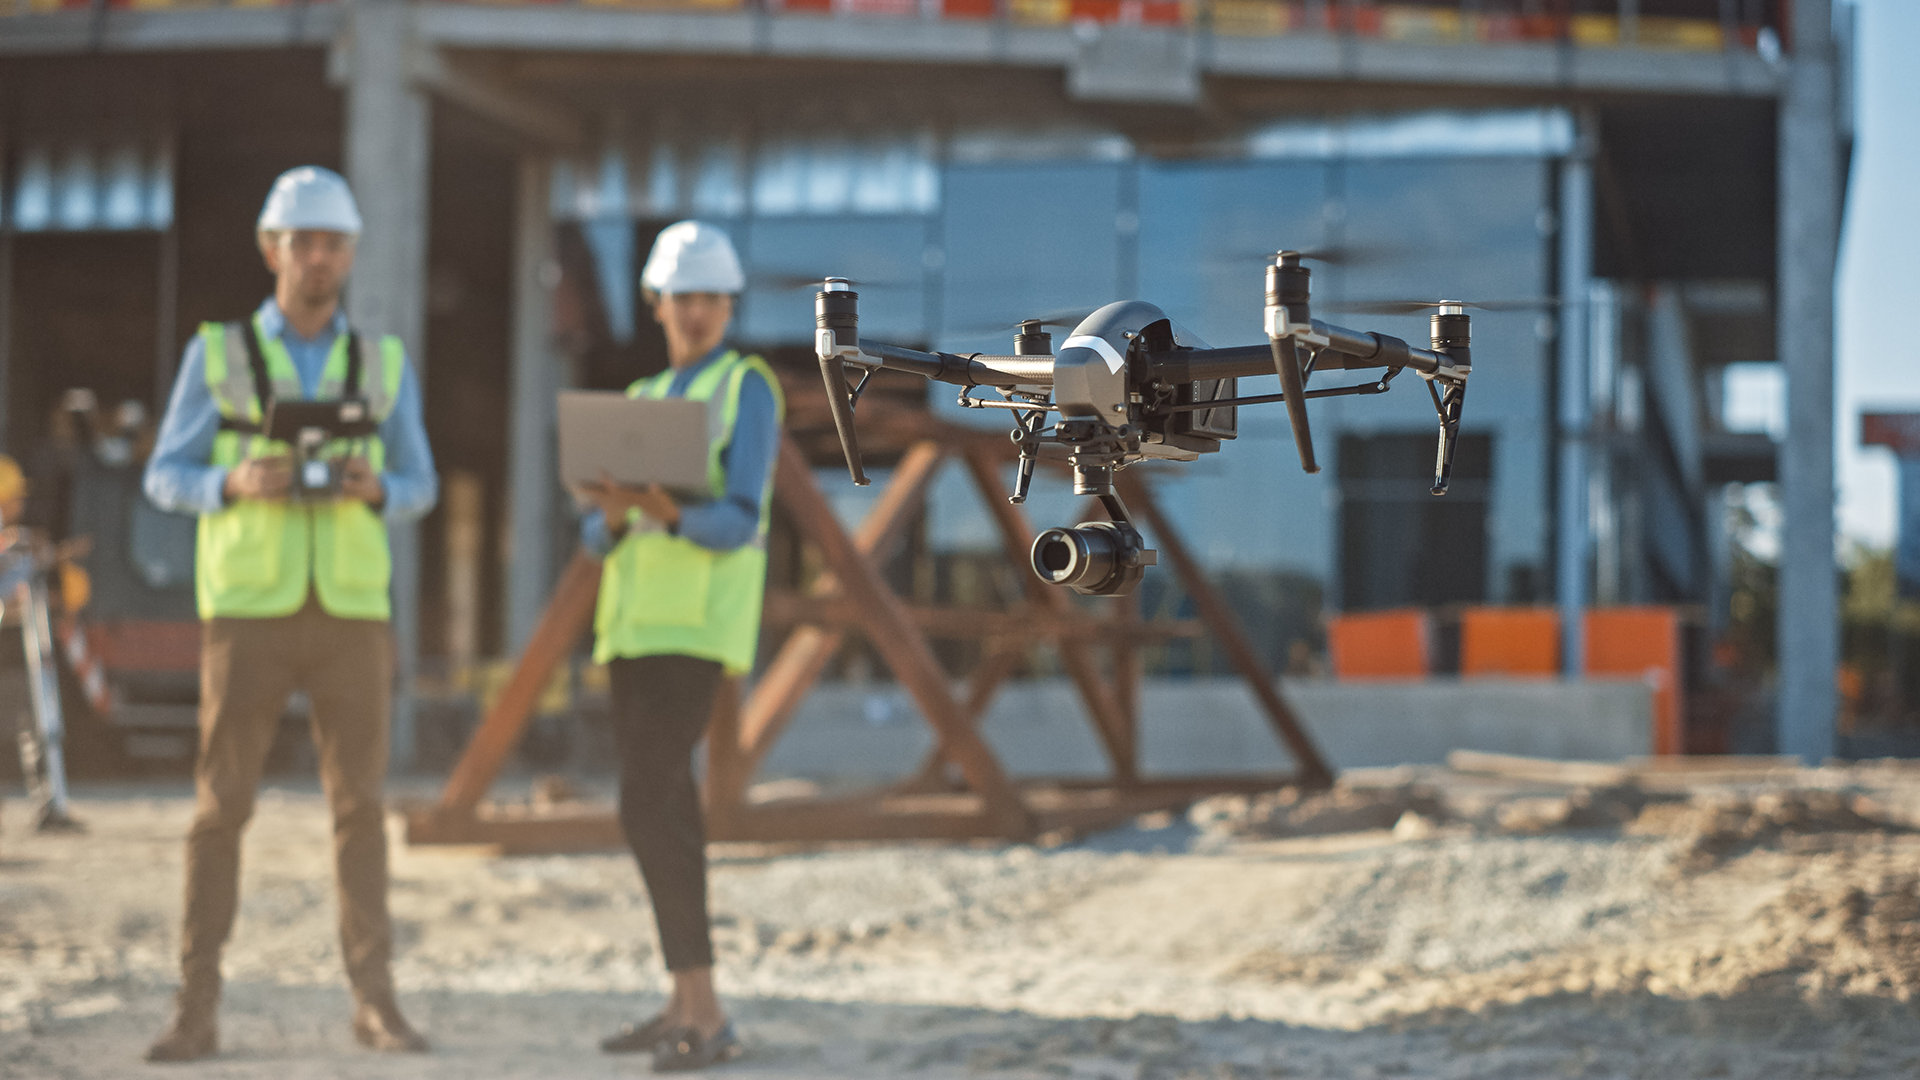 Drone Technology in Construction ConTech